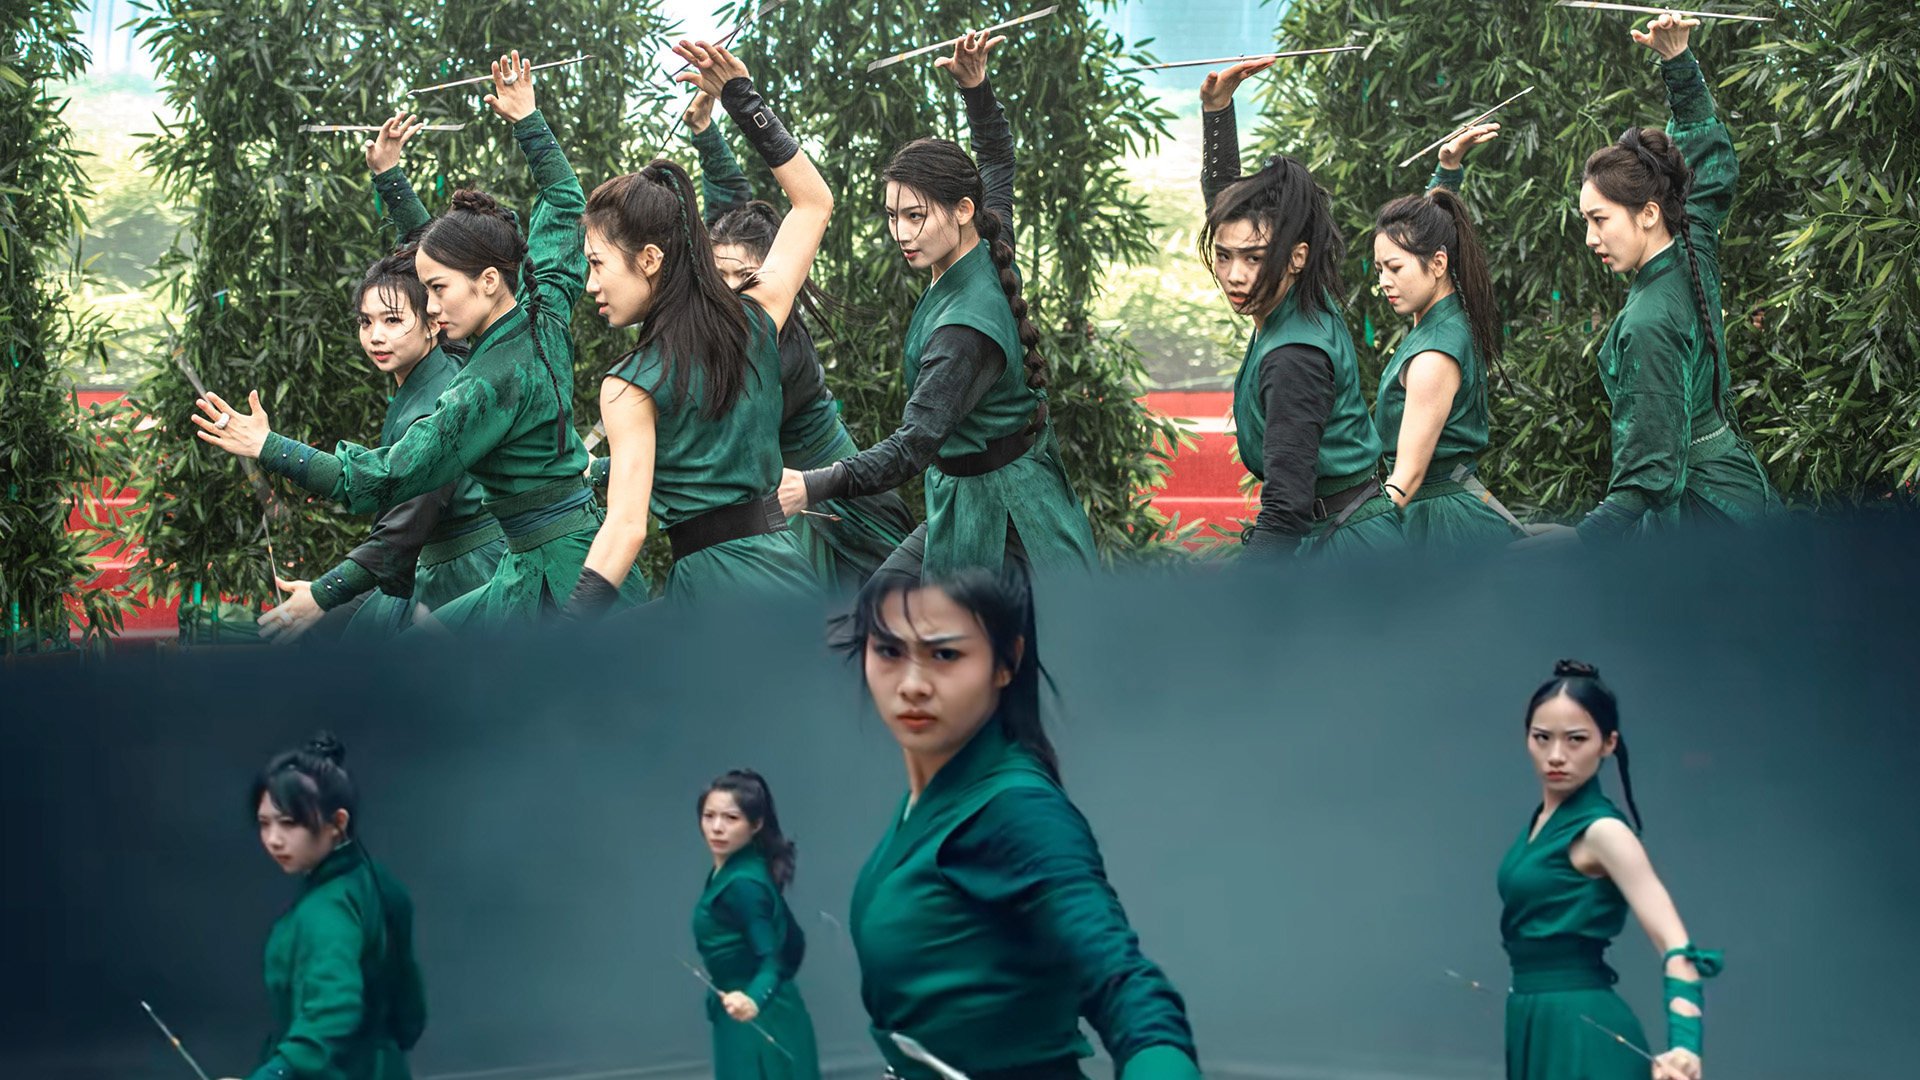 Since its launch in May, an all-female martial arts group in China has captivated audiences and garnered widespread attention, breathing new life into the ancient fighting genre. 
Photo: SCMP composite/Douyin/Weibo